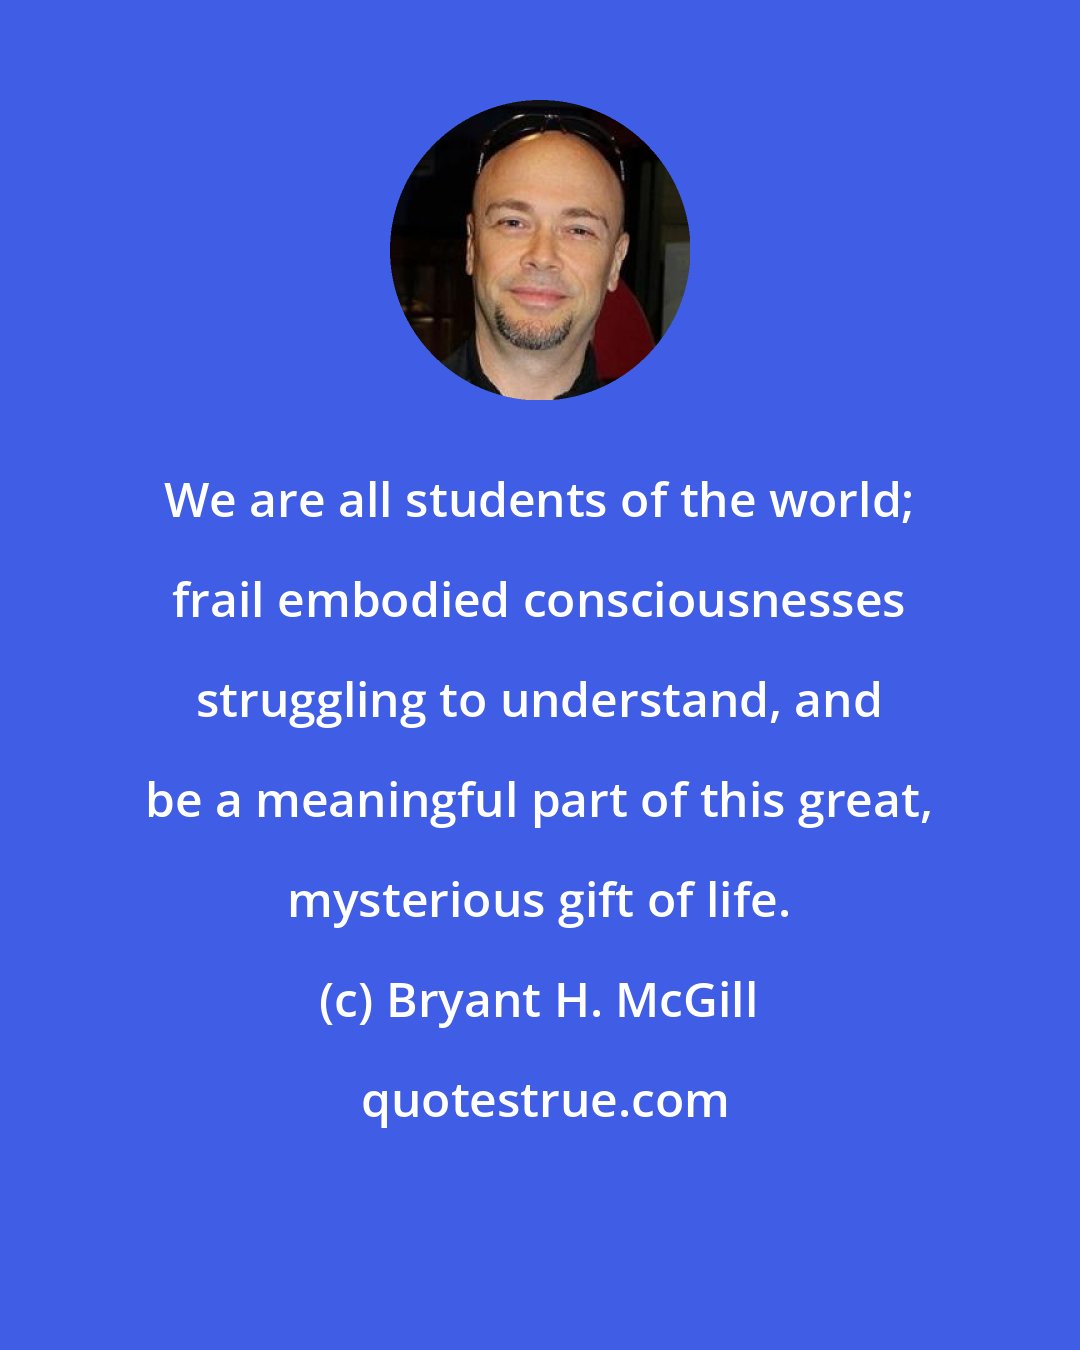 Bryant H. McGill: We are all students of the world; frail embodied consciousnesses struggling to understand, and be a meaningful part of this great, mysterious gift of life.